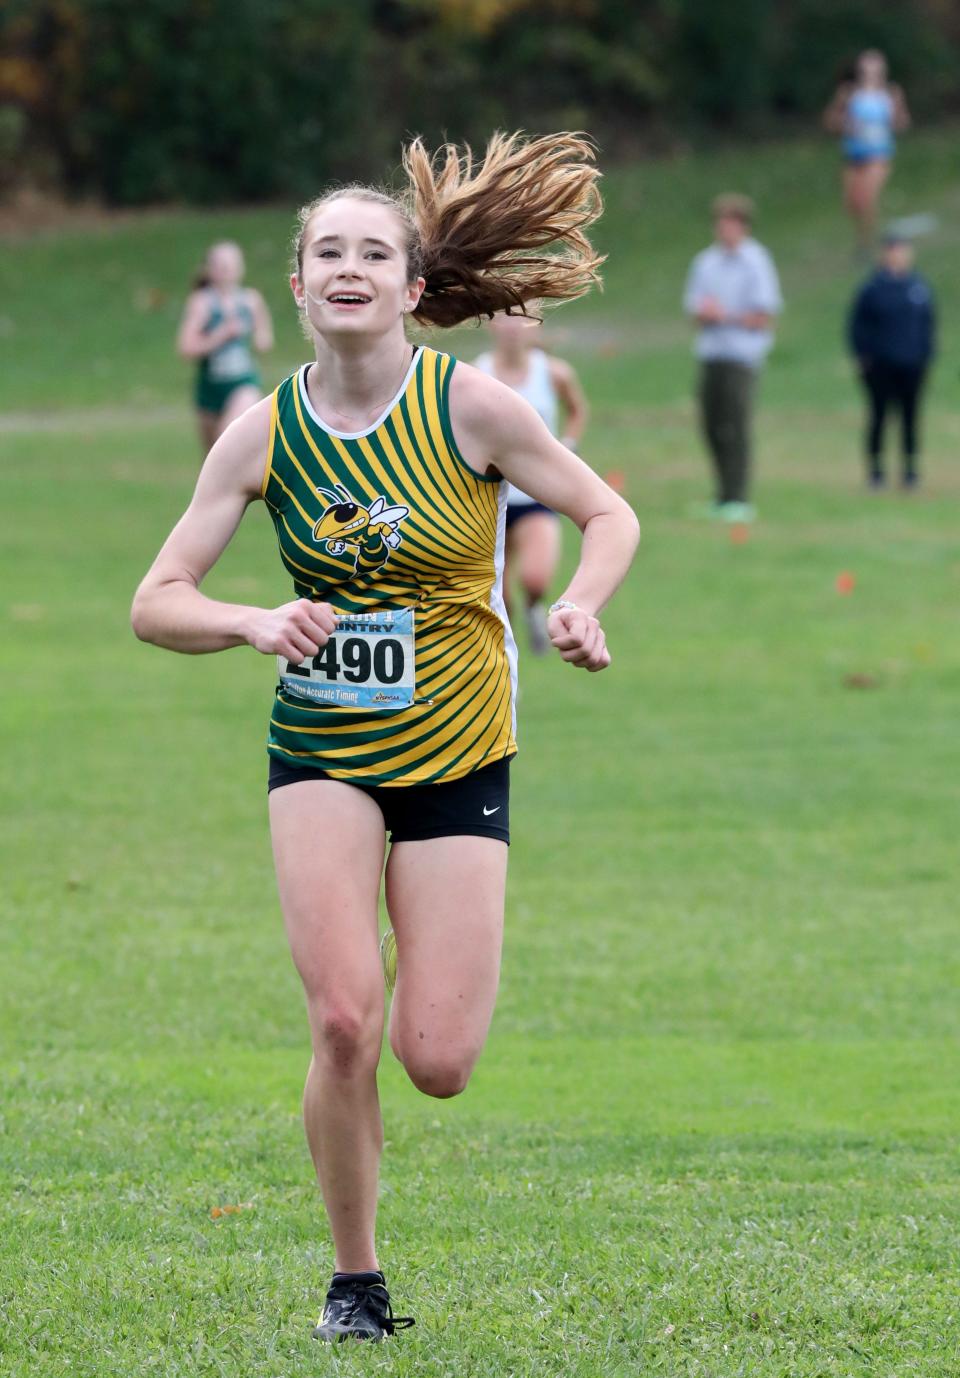 Caitlin Thomas from Hastings approaches the finish line as athletes compete in the girls Class C Section 1 Cross Country Championships at Bowdoin Park in Wappingers Falls, Nov. 4, 2023.